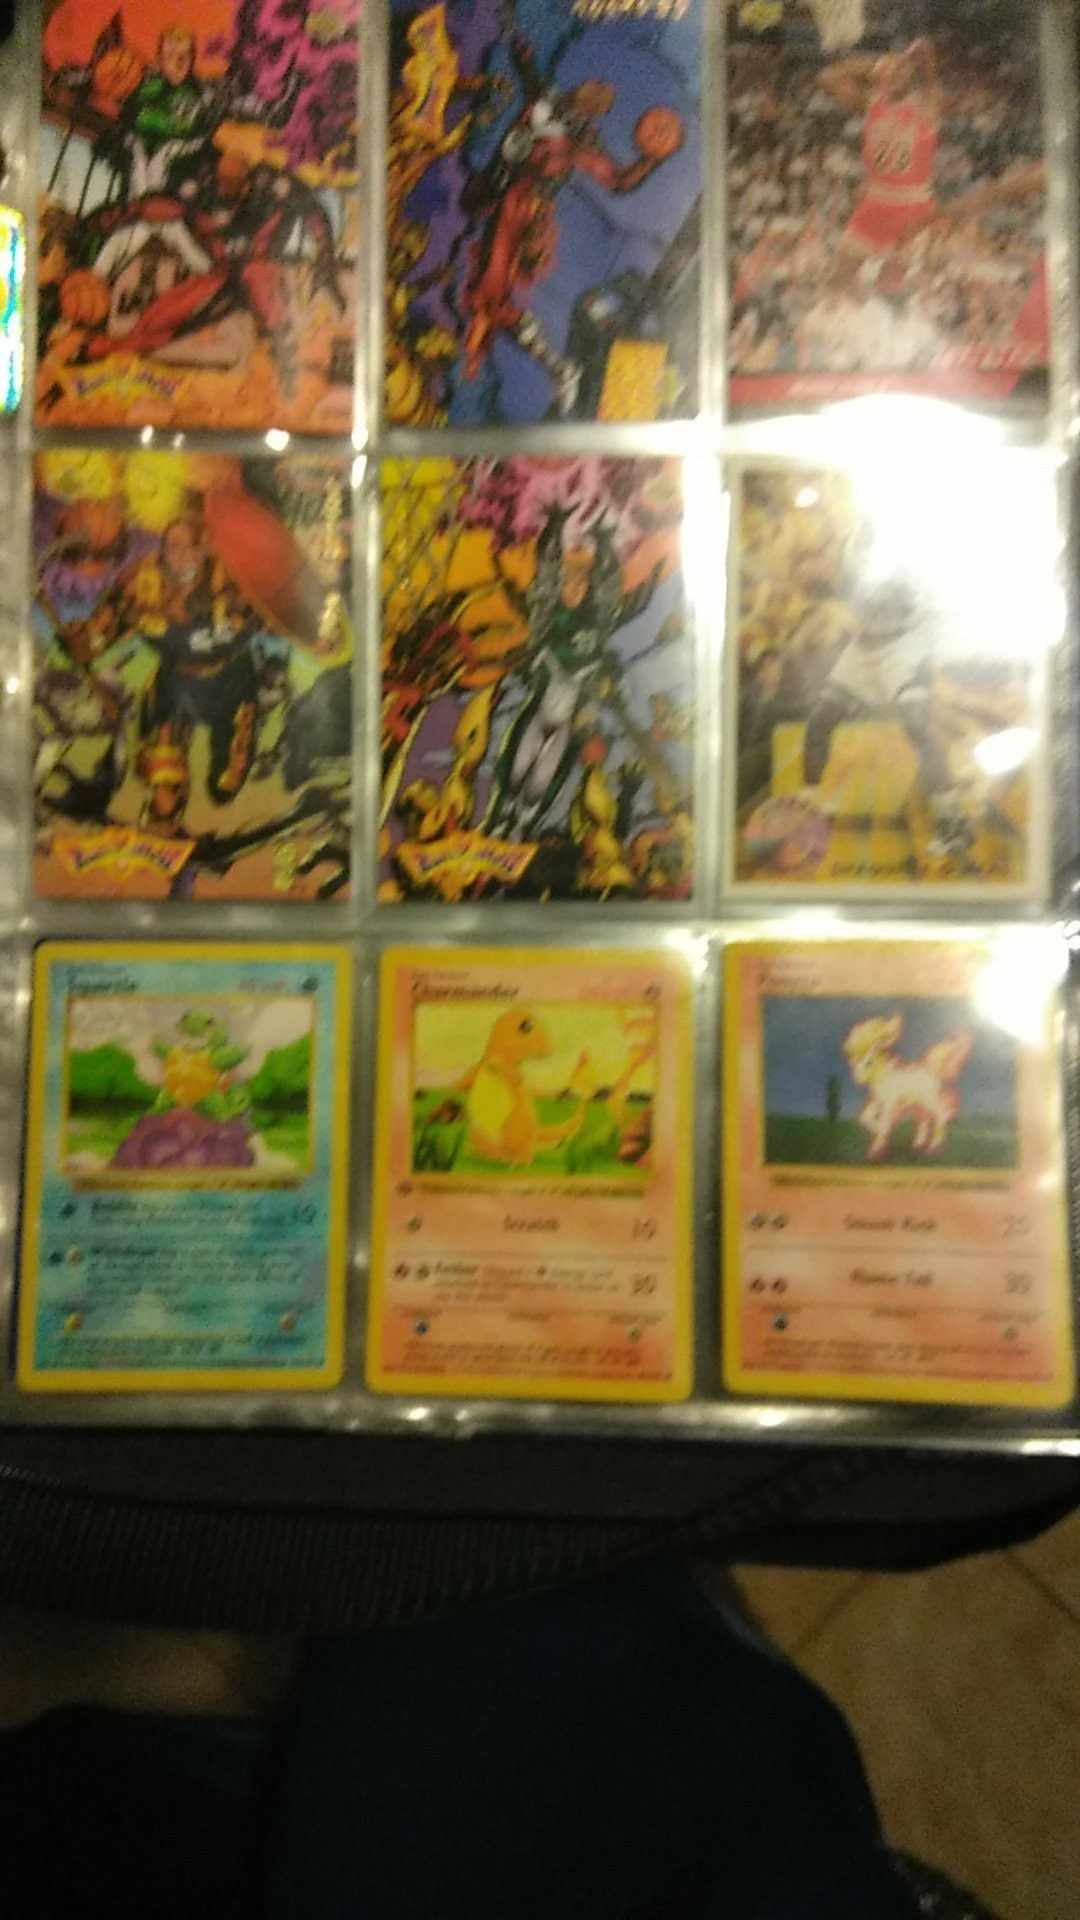 3 1995 Pokemon cards and dragon Ball z cards